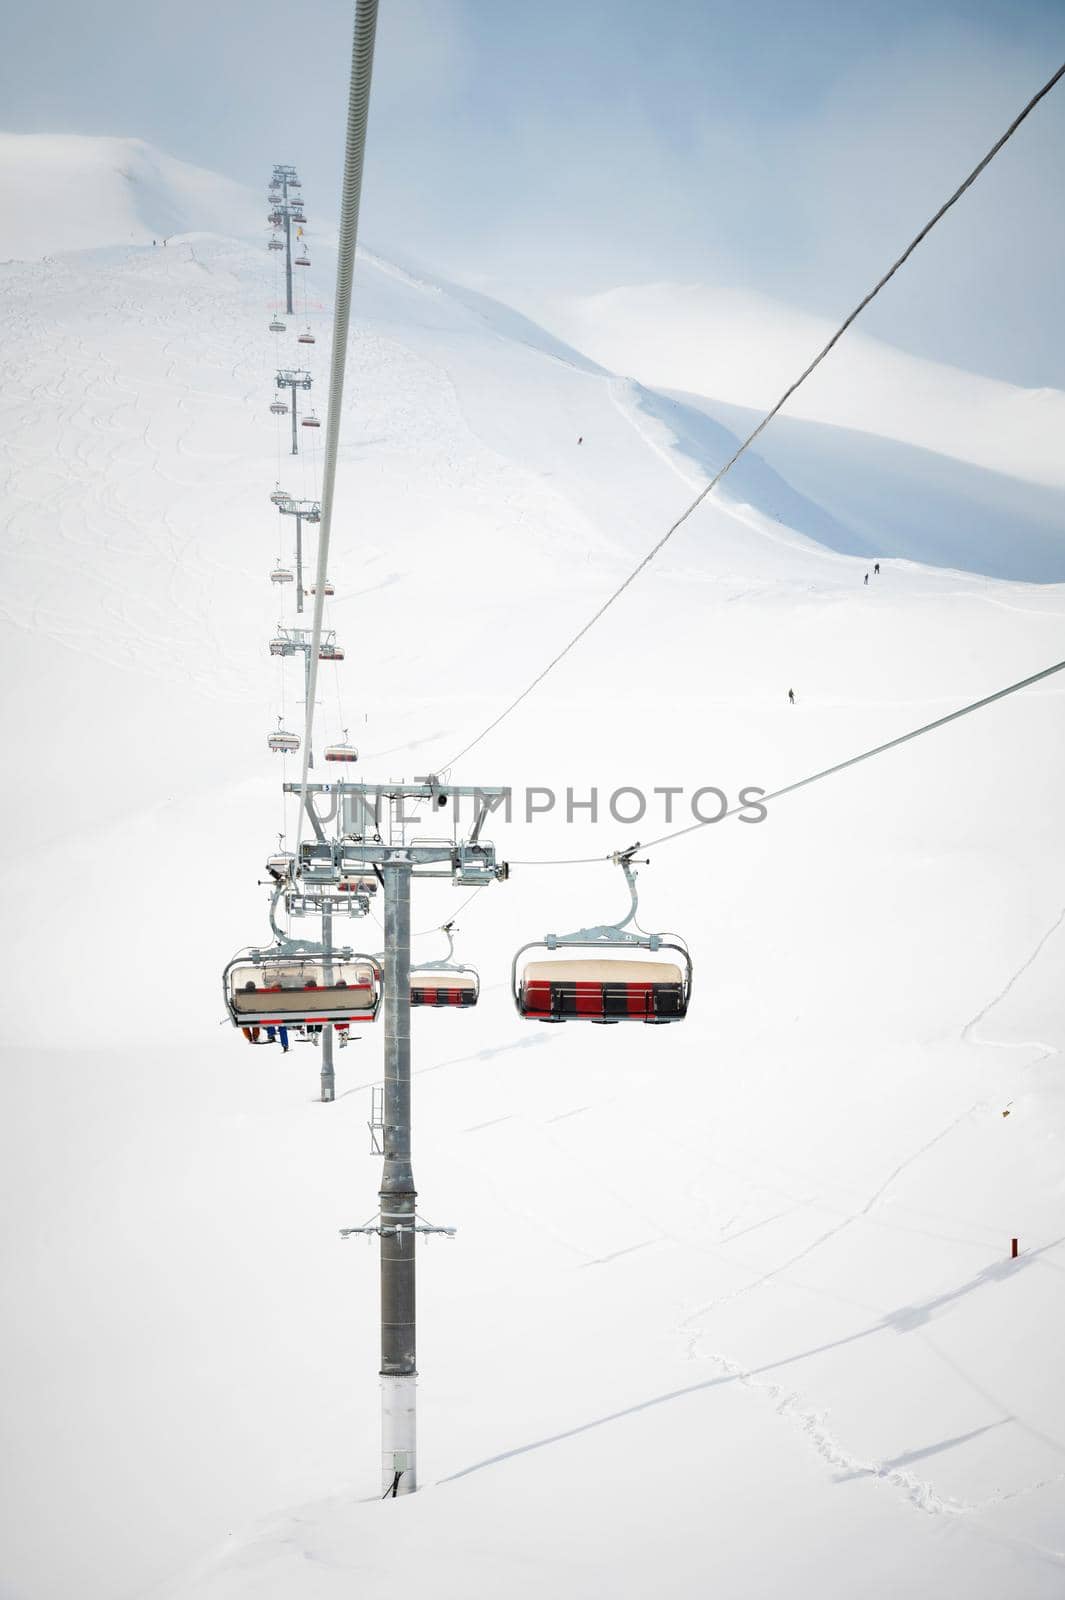 An open-air lift that goes to the top of the mountain for downhill skiing. Sunny day surrounded by snowy fields. Ski resort slope in good weather.